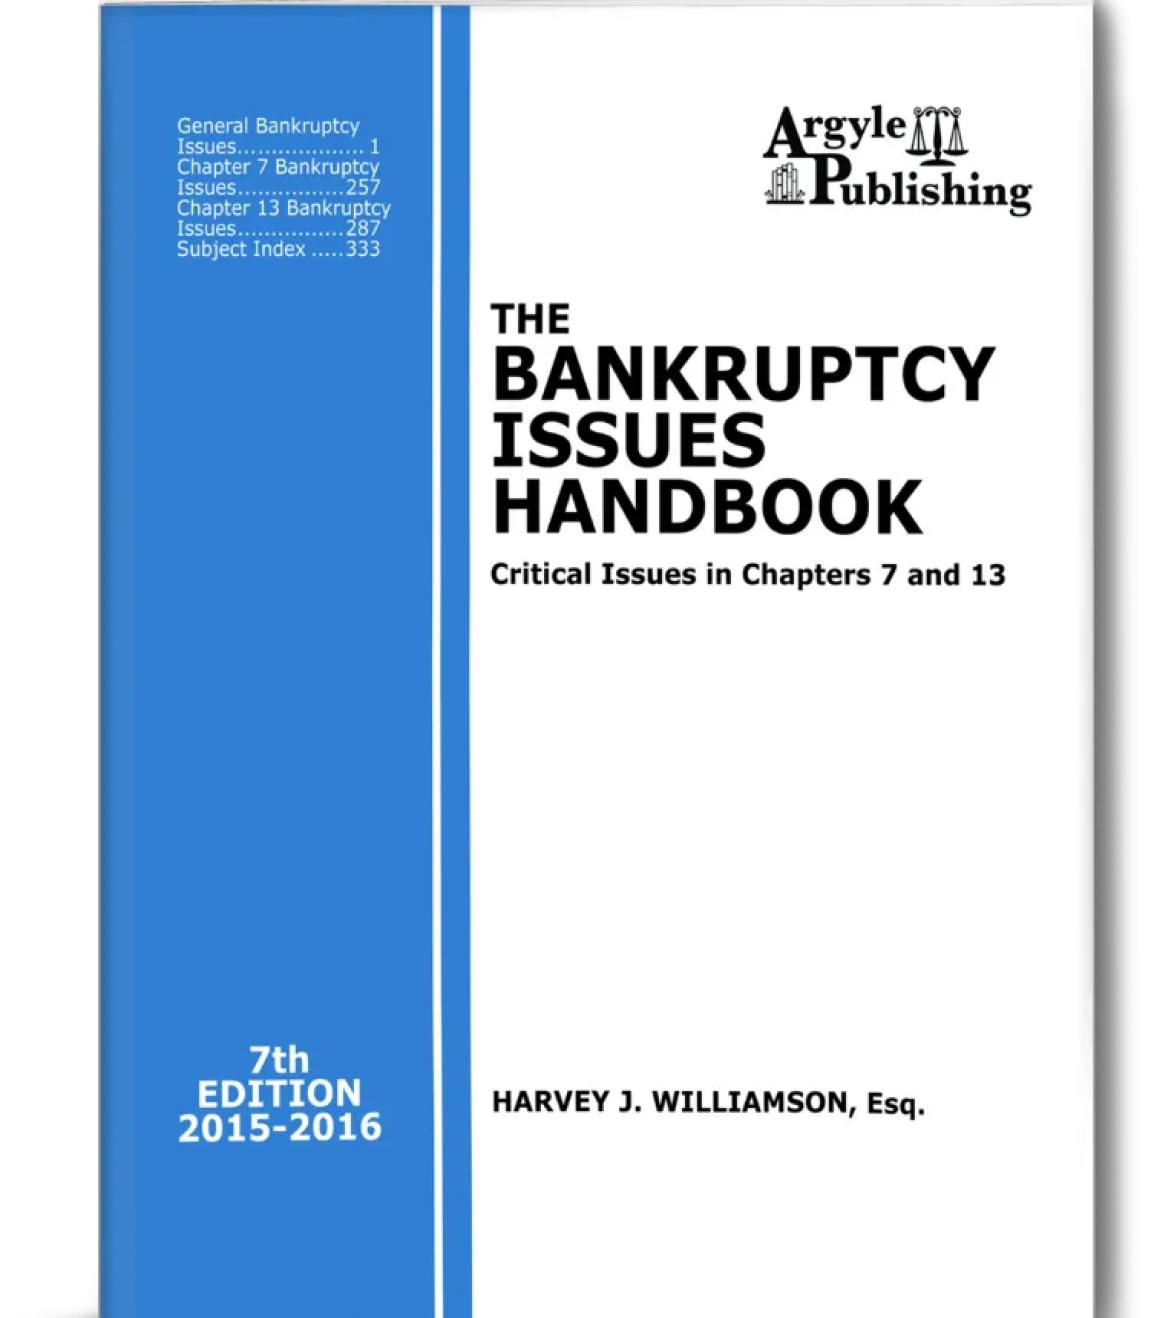 The BANKCRUPTCY ISSUES HANDBOOK